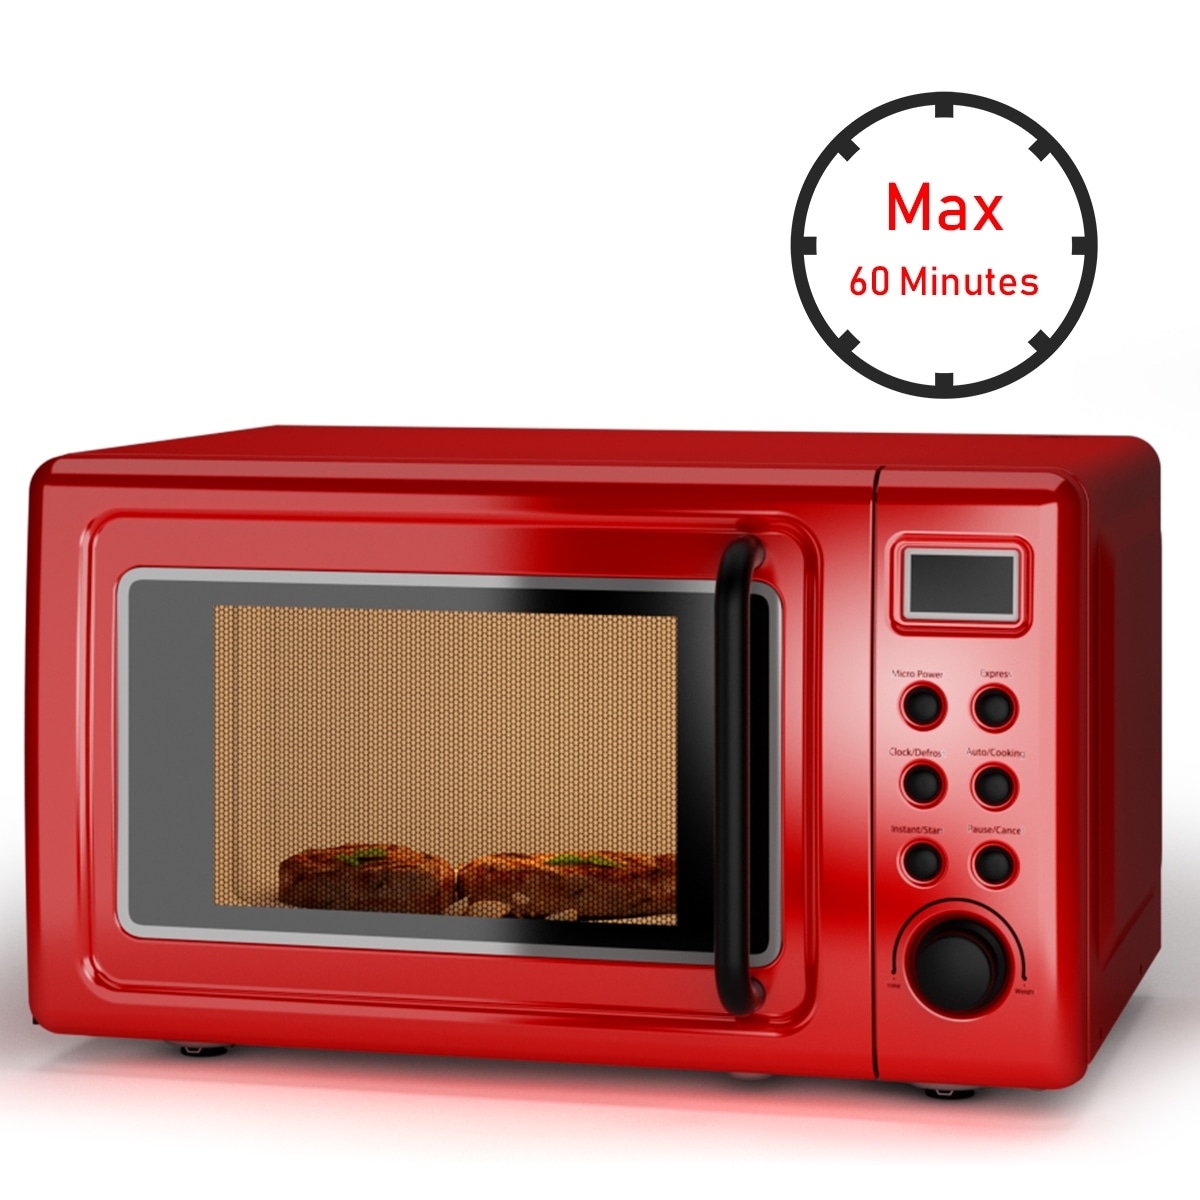 Kitchen Office Home Mini Microwave Oven Digital Countertop Red